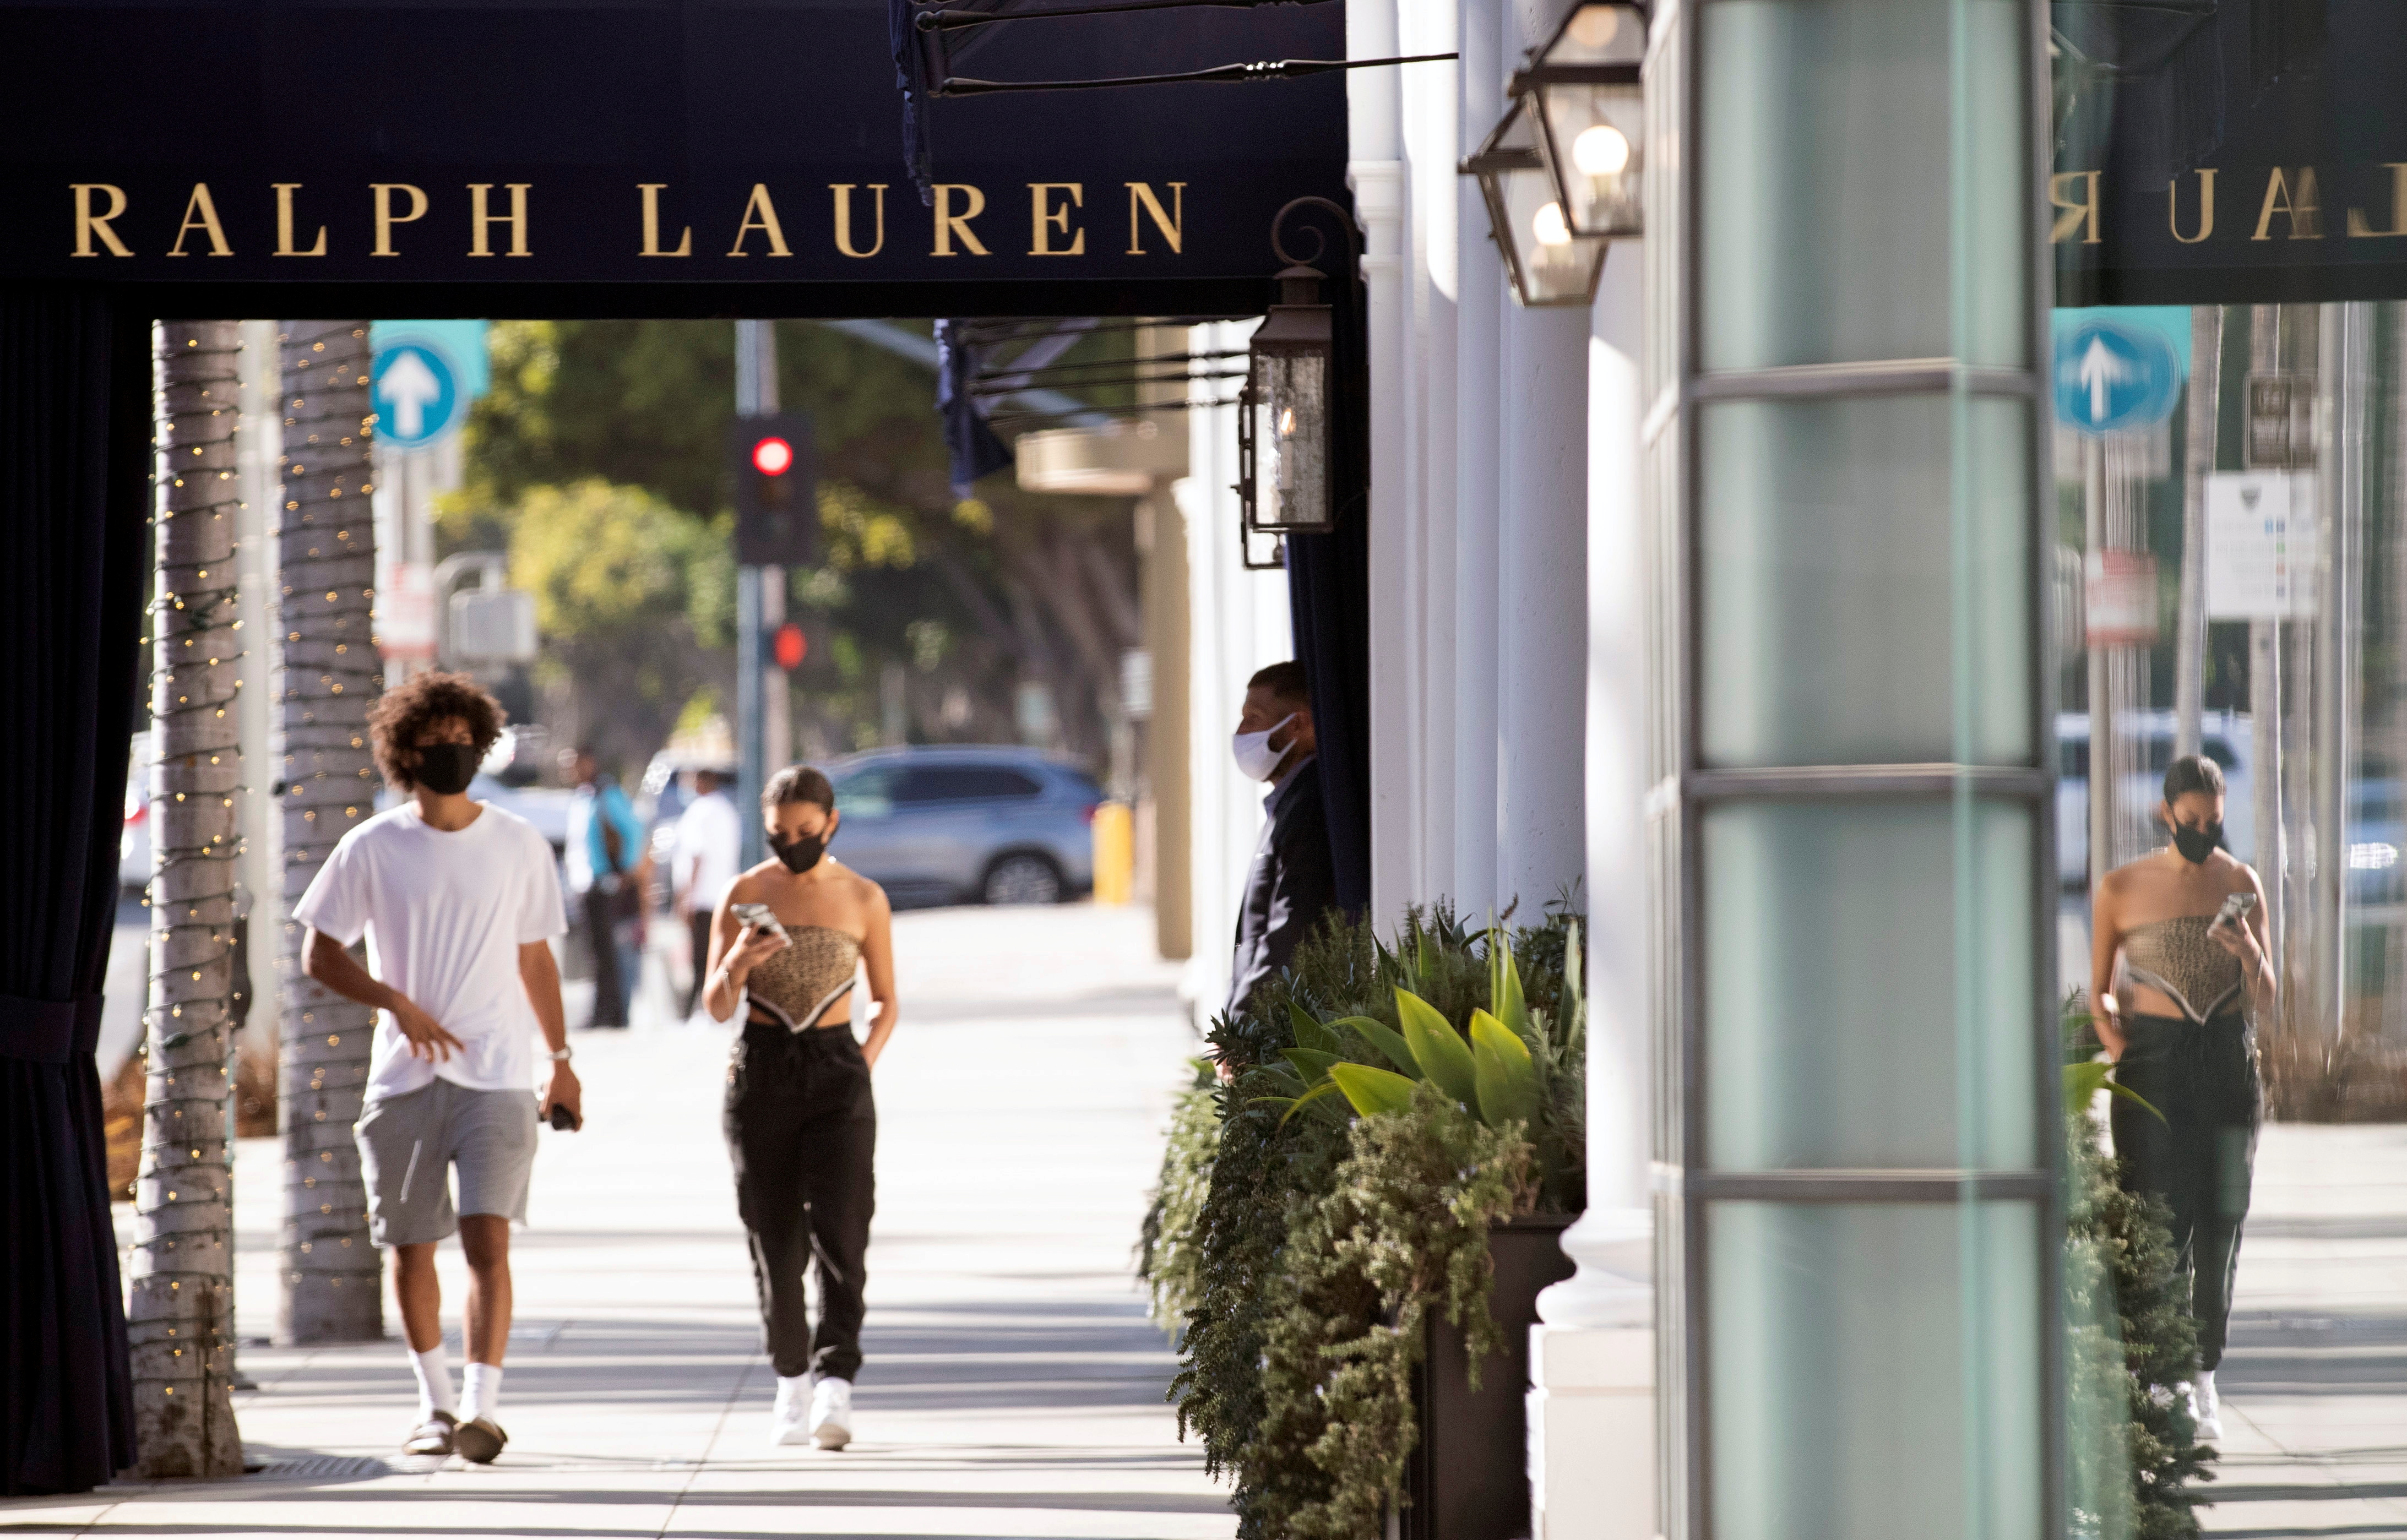 A security guard stands outside the Ralph Lauren store during the outbreak of the coronavirus disease (COVID-19), in Beverly Hills